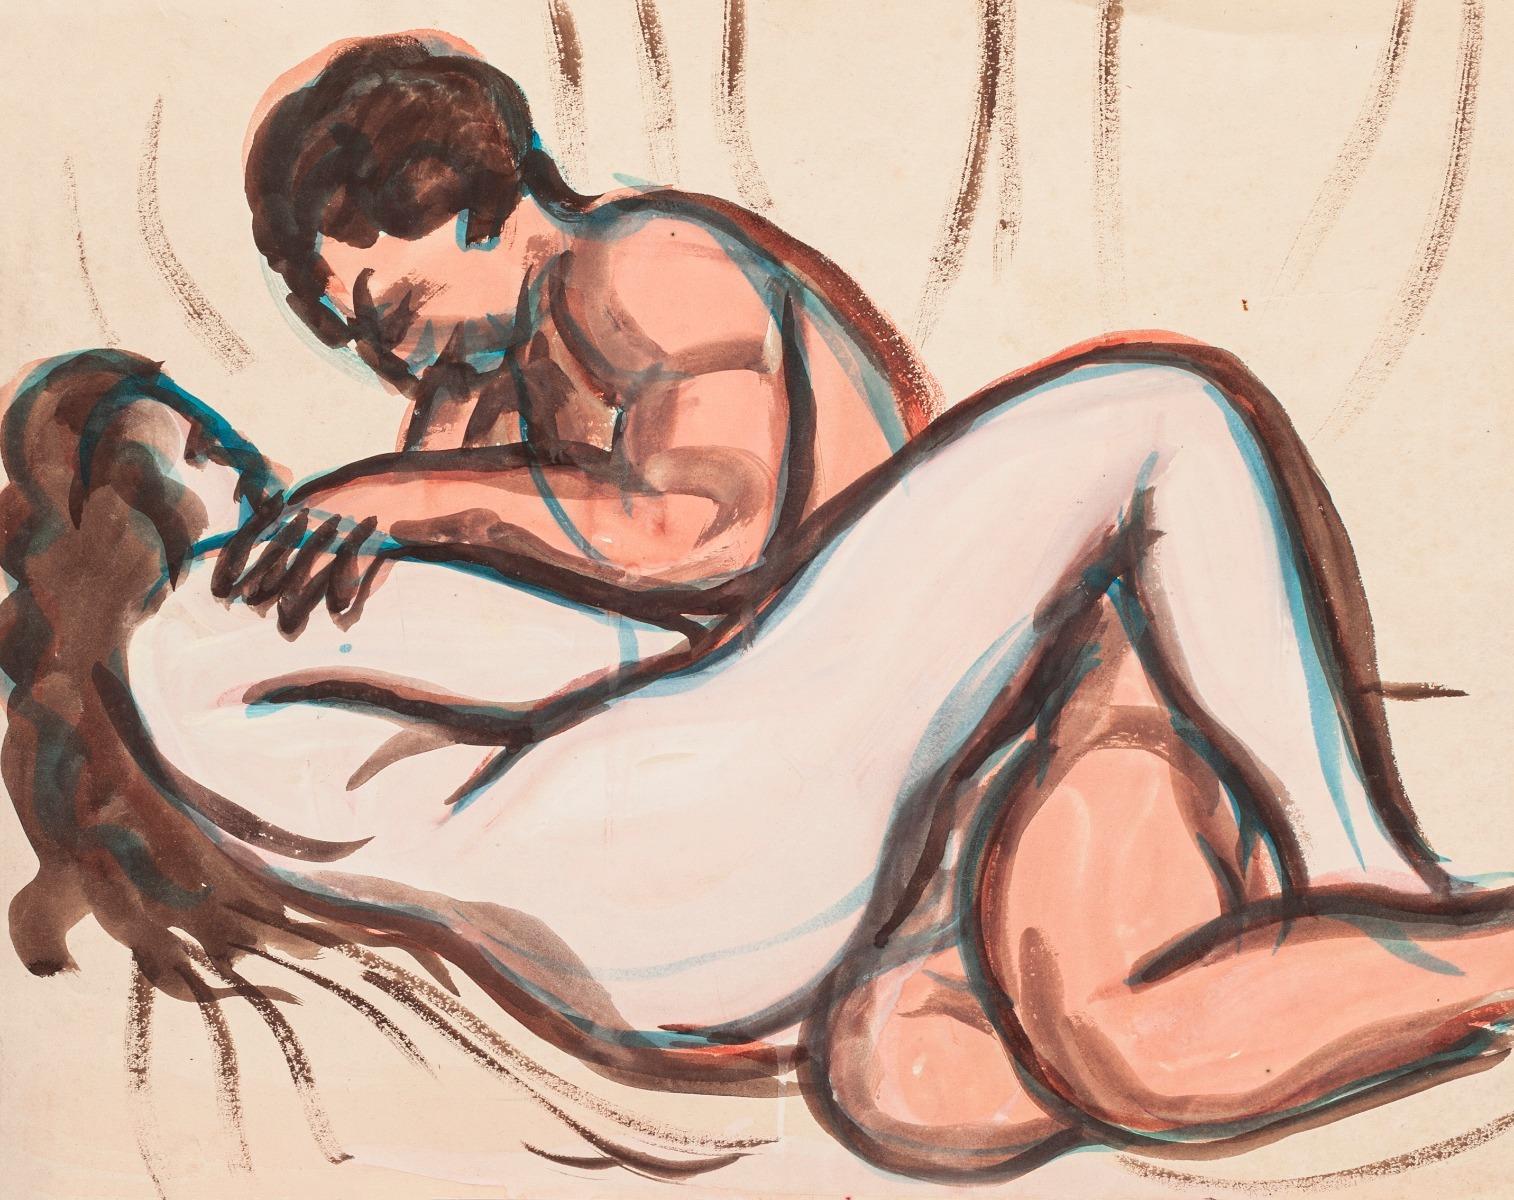 Unknown Nude – Lovers - Aquarell - 1950 ca.